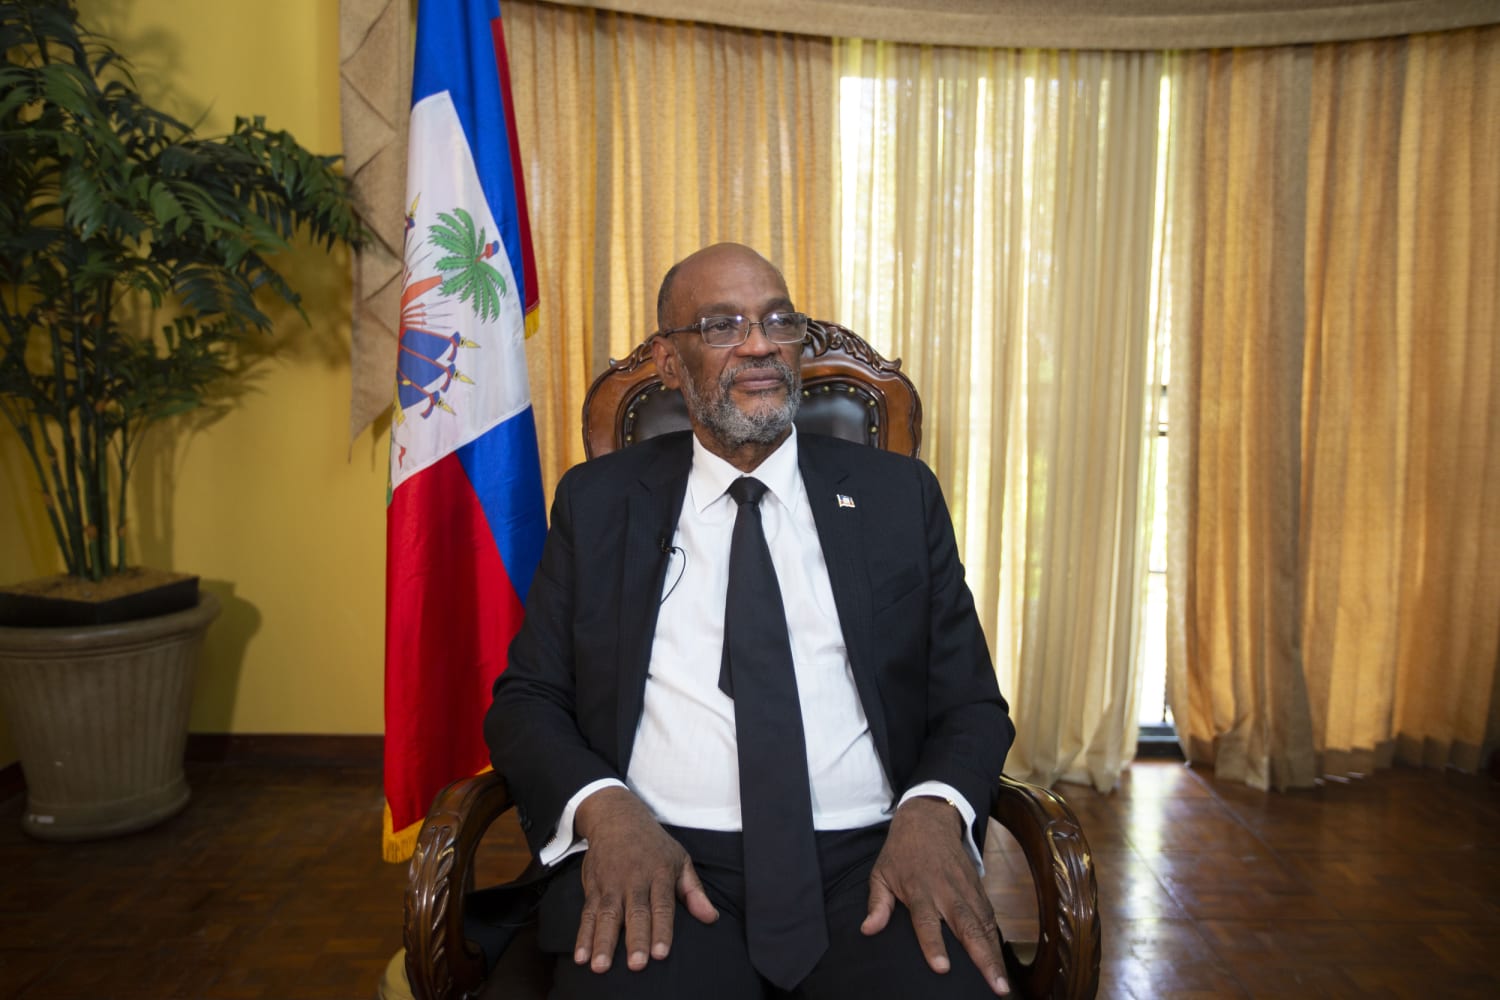 Haitian prime minister survives weekend assassination attempt, his office says